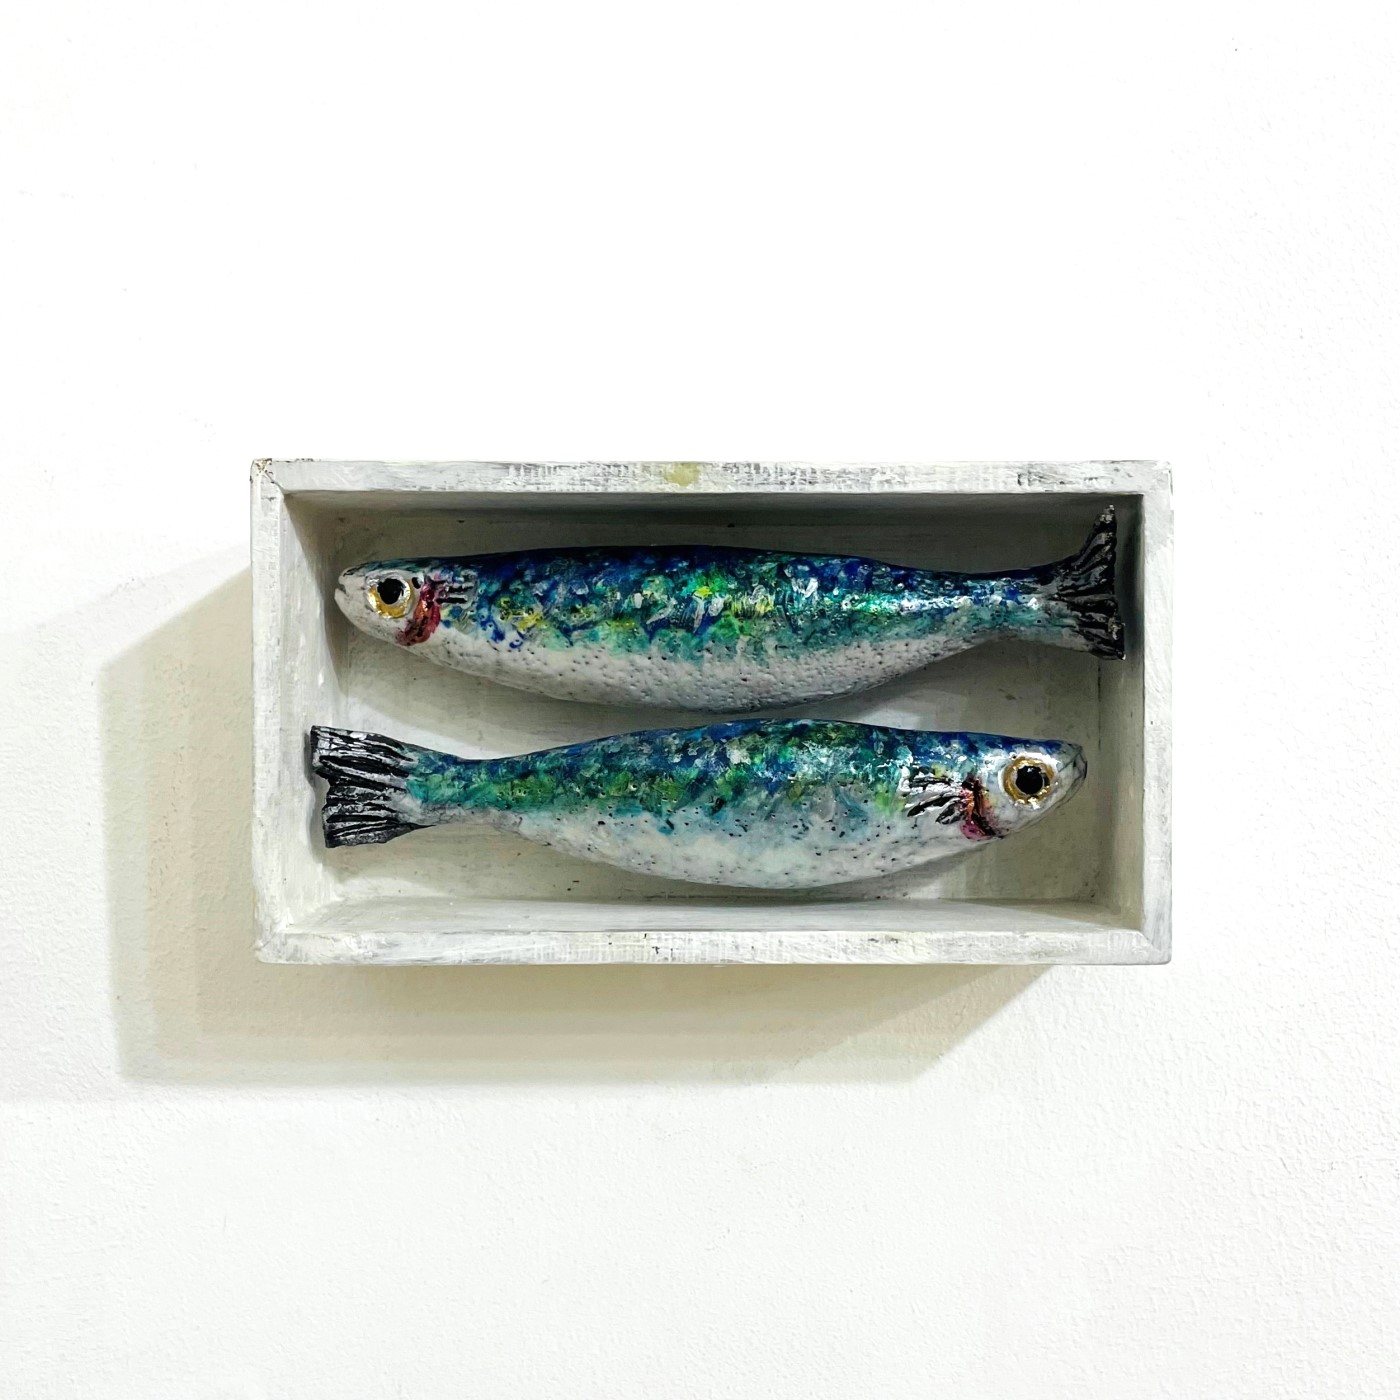 'The Pantry: Two Sardines' by artist Diana Tonnison